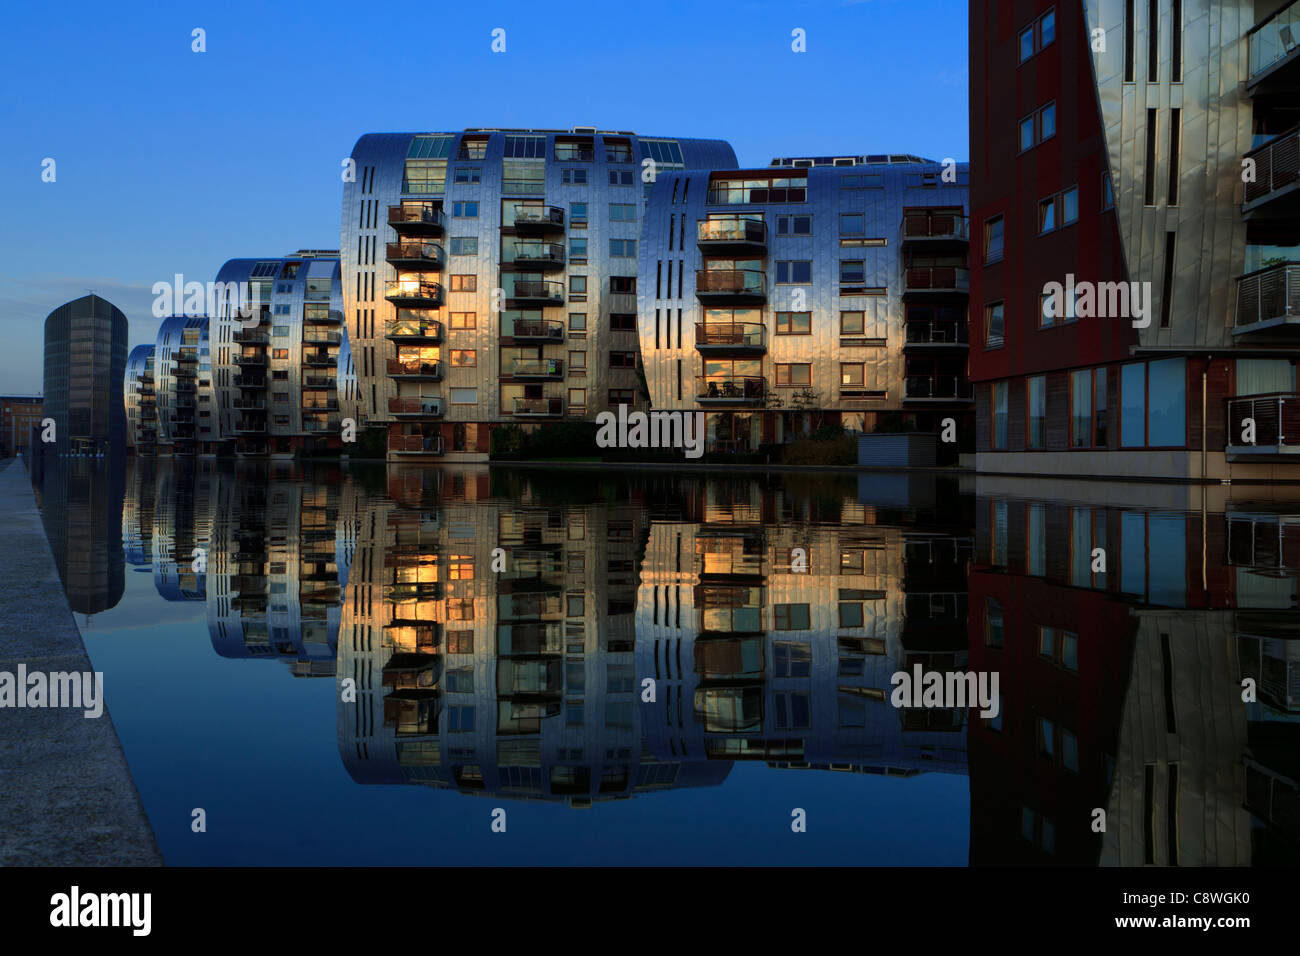 The Armada apartment buildings located in the Paleiskwartier area of Den Bosch in the Netherlands Stock Photo